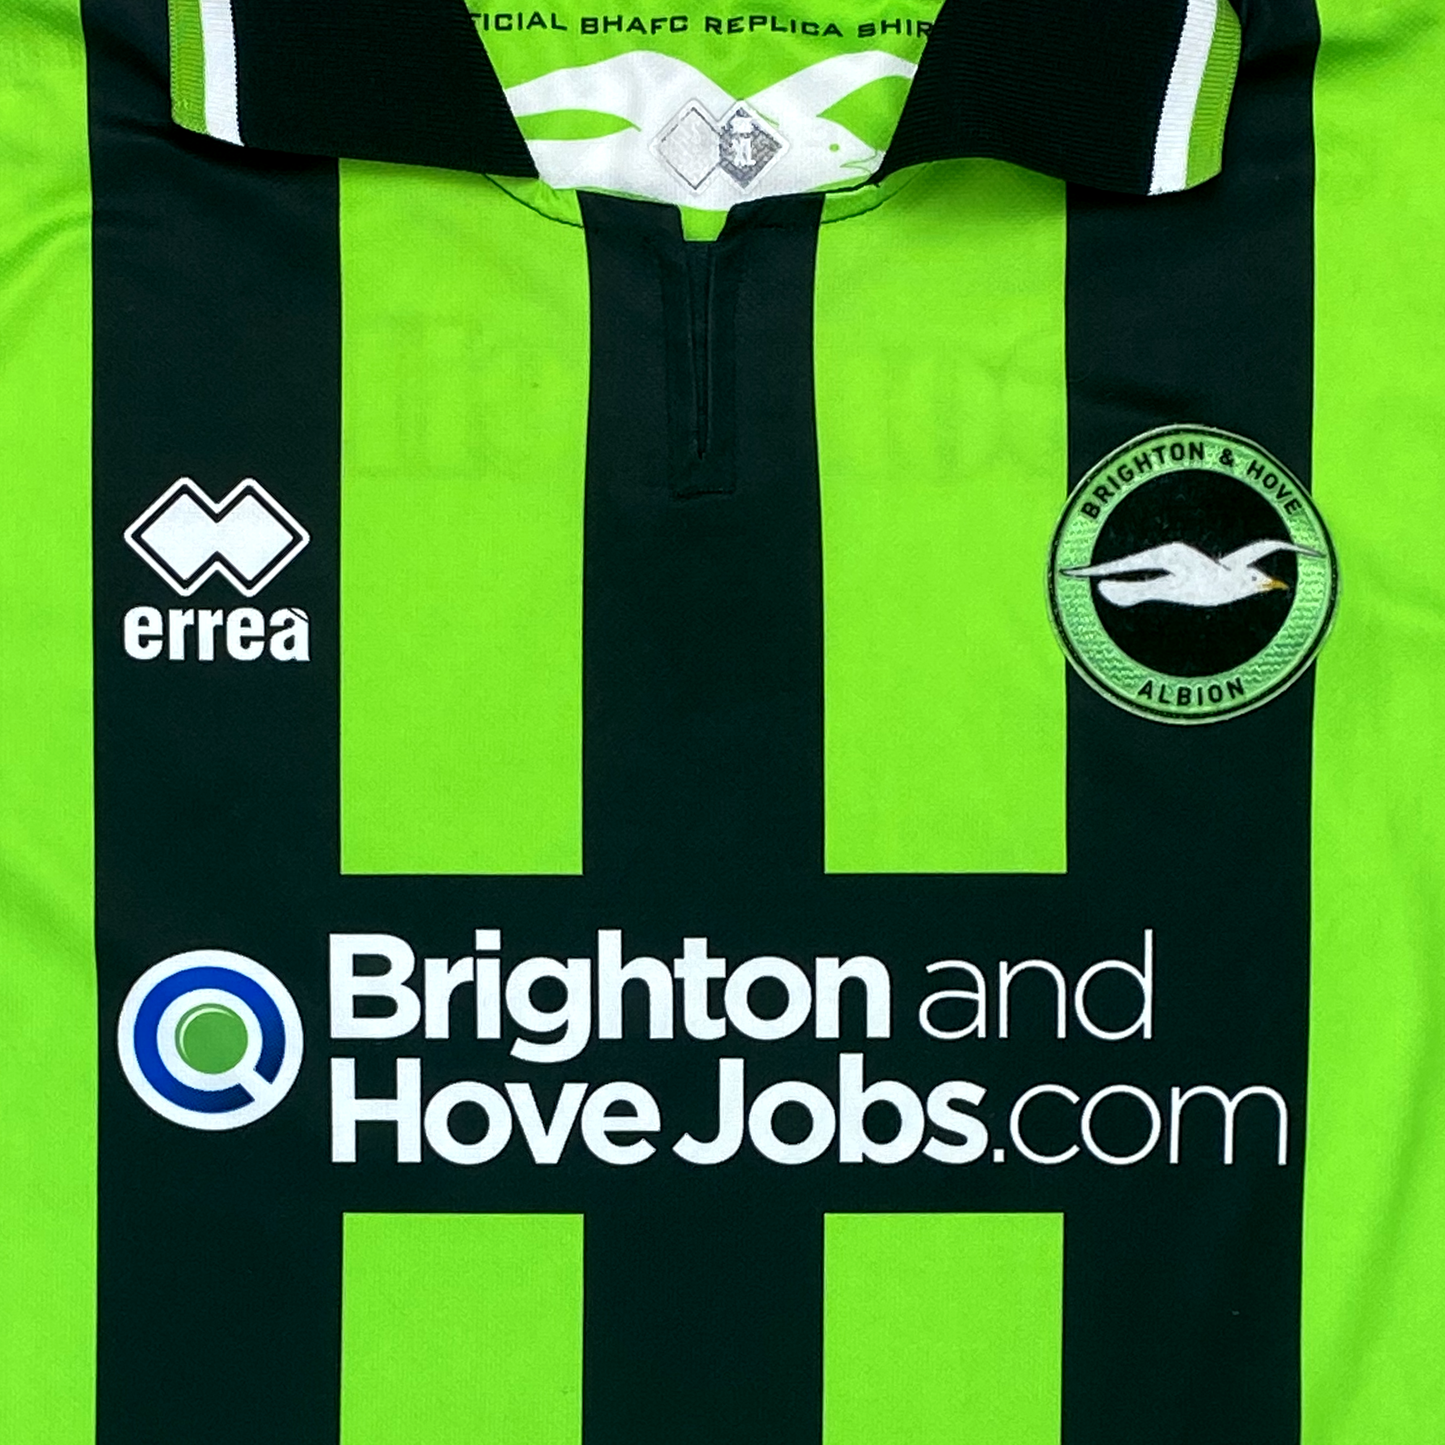 Brighton & Hove Albion Long-Sleeve Away Shirt (2011-13) | Extra Large